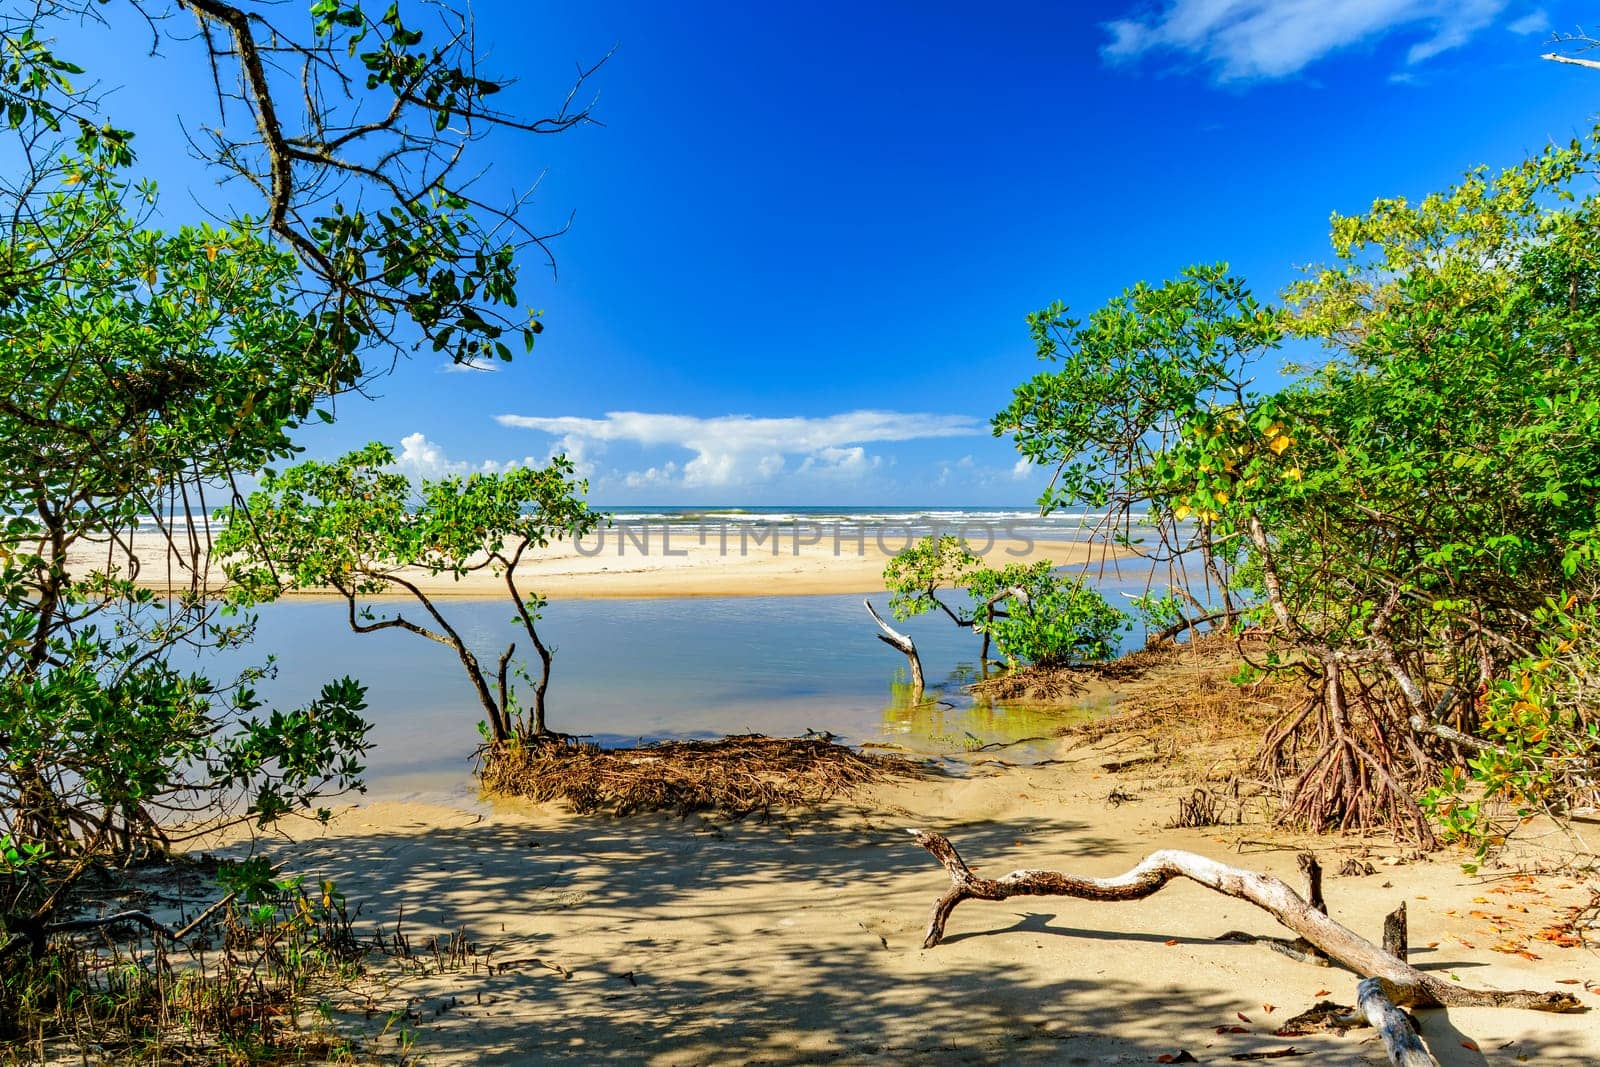 Meeting between the mangrove, the river, the sand and the sea at Sargi beach in Serra Grande on the south coast of Bahia